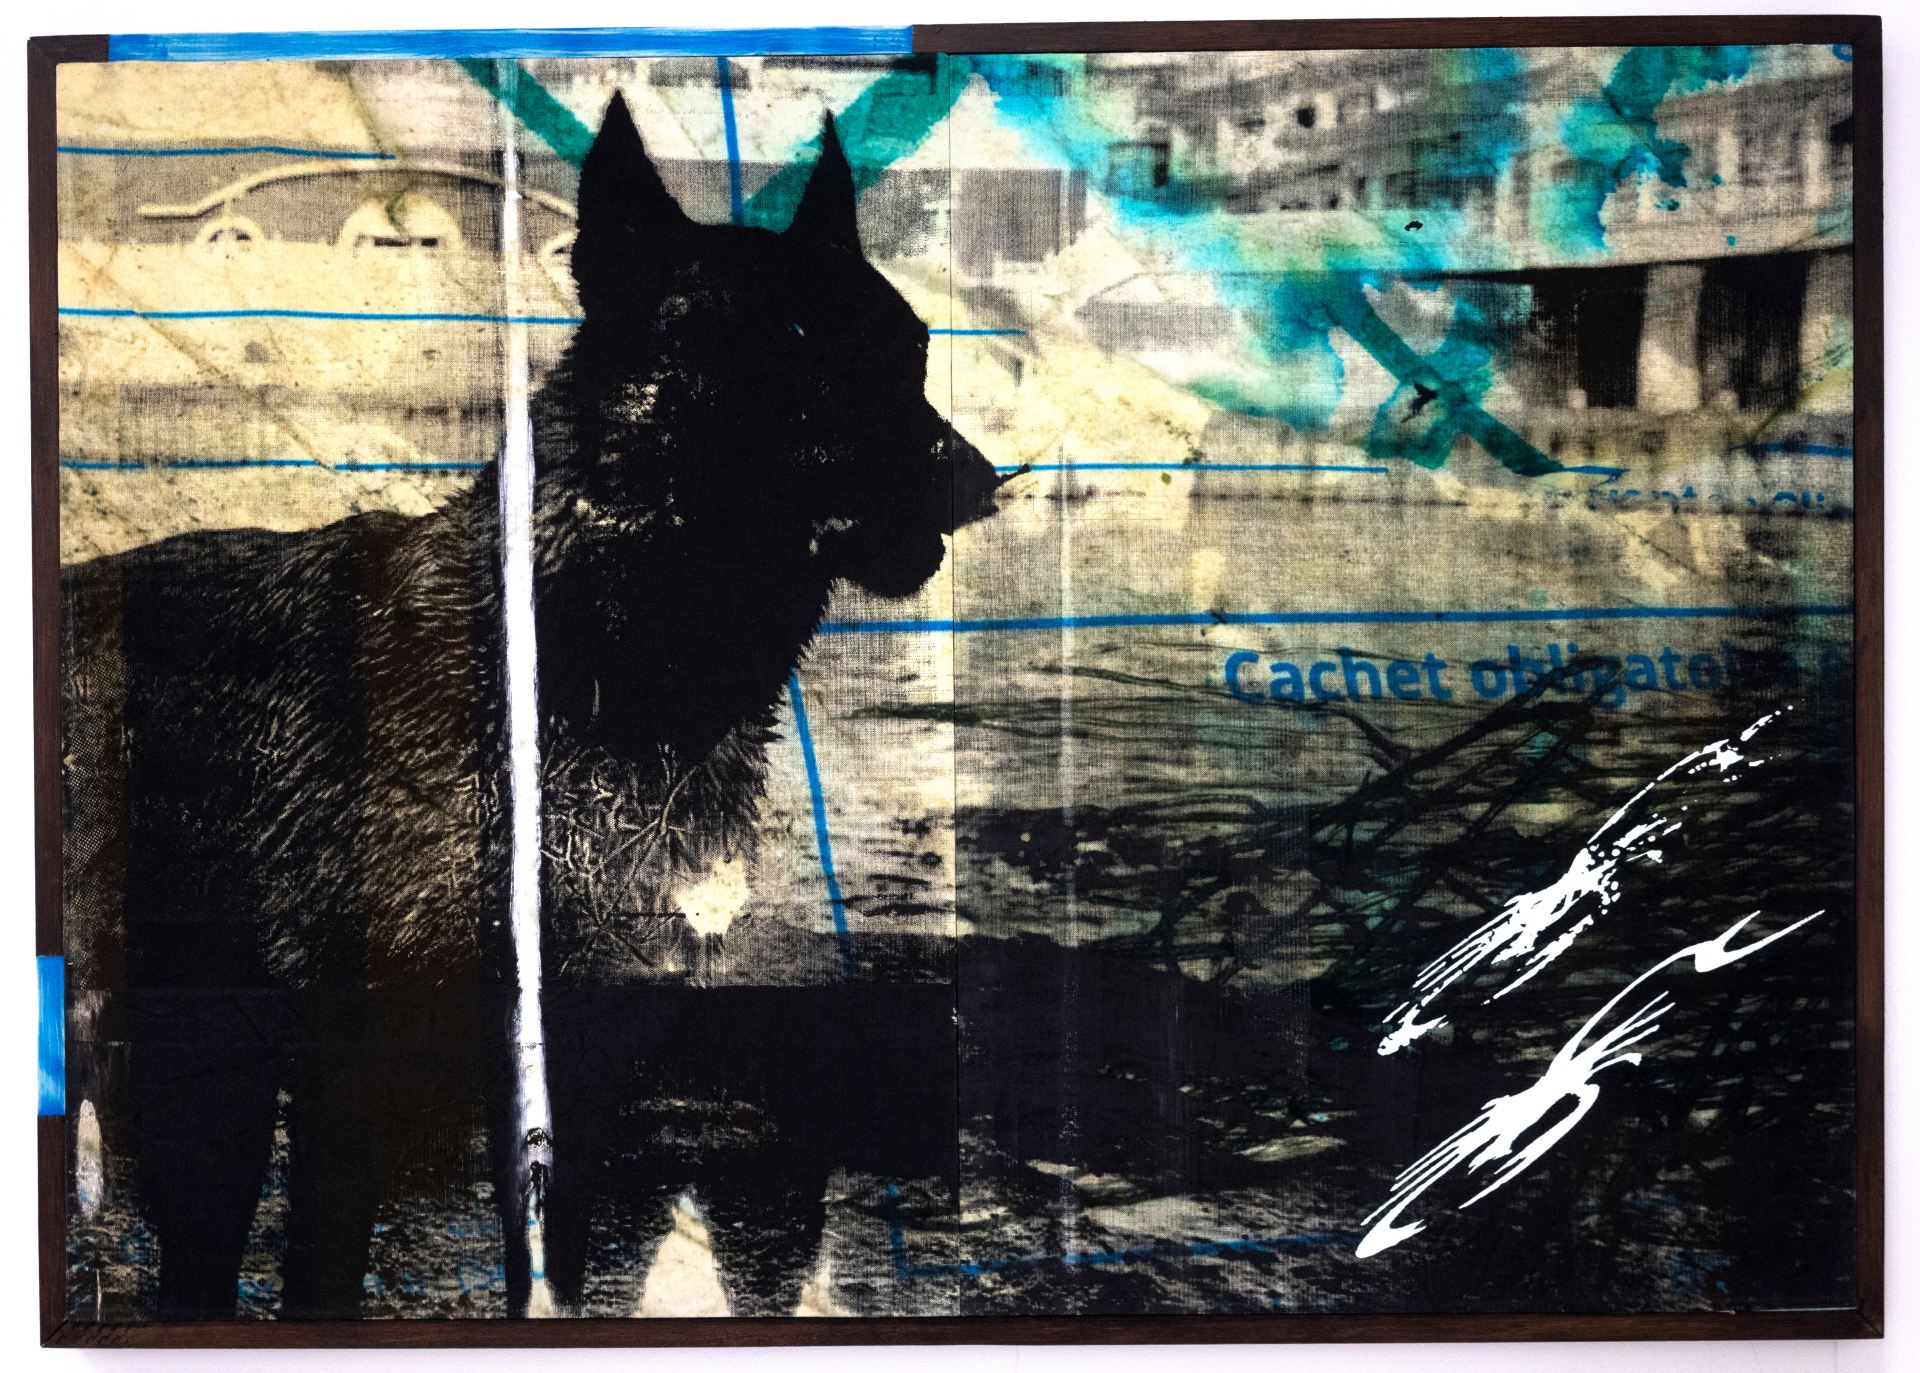 A black print of a dog against a photographic background.